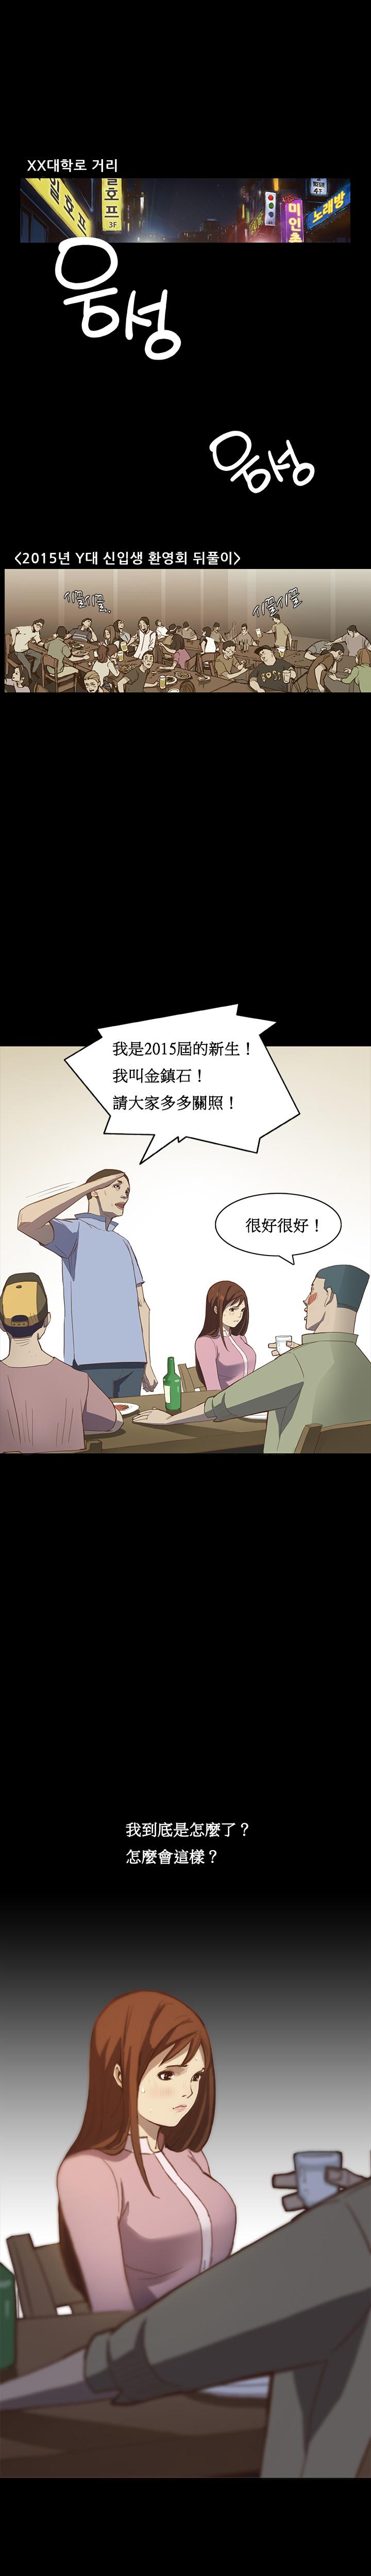 Role Play [Keum Sah Gong] Si-Eun Ch.1-3【委員長個人漢化】（持續更新） Public Sex - Page 2